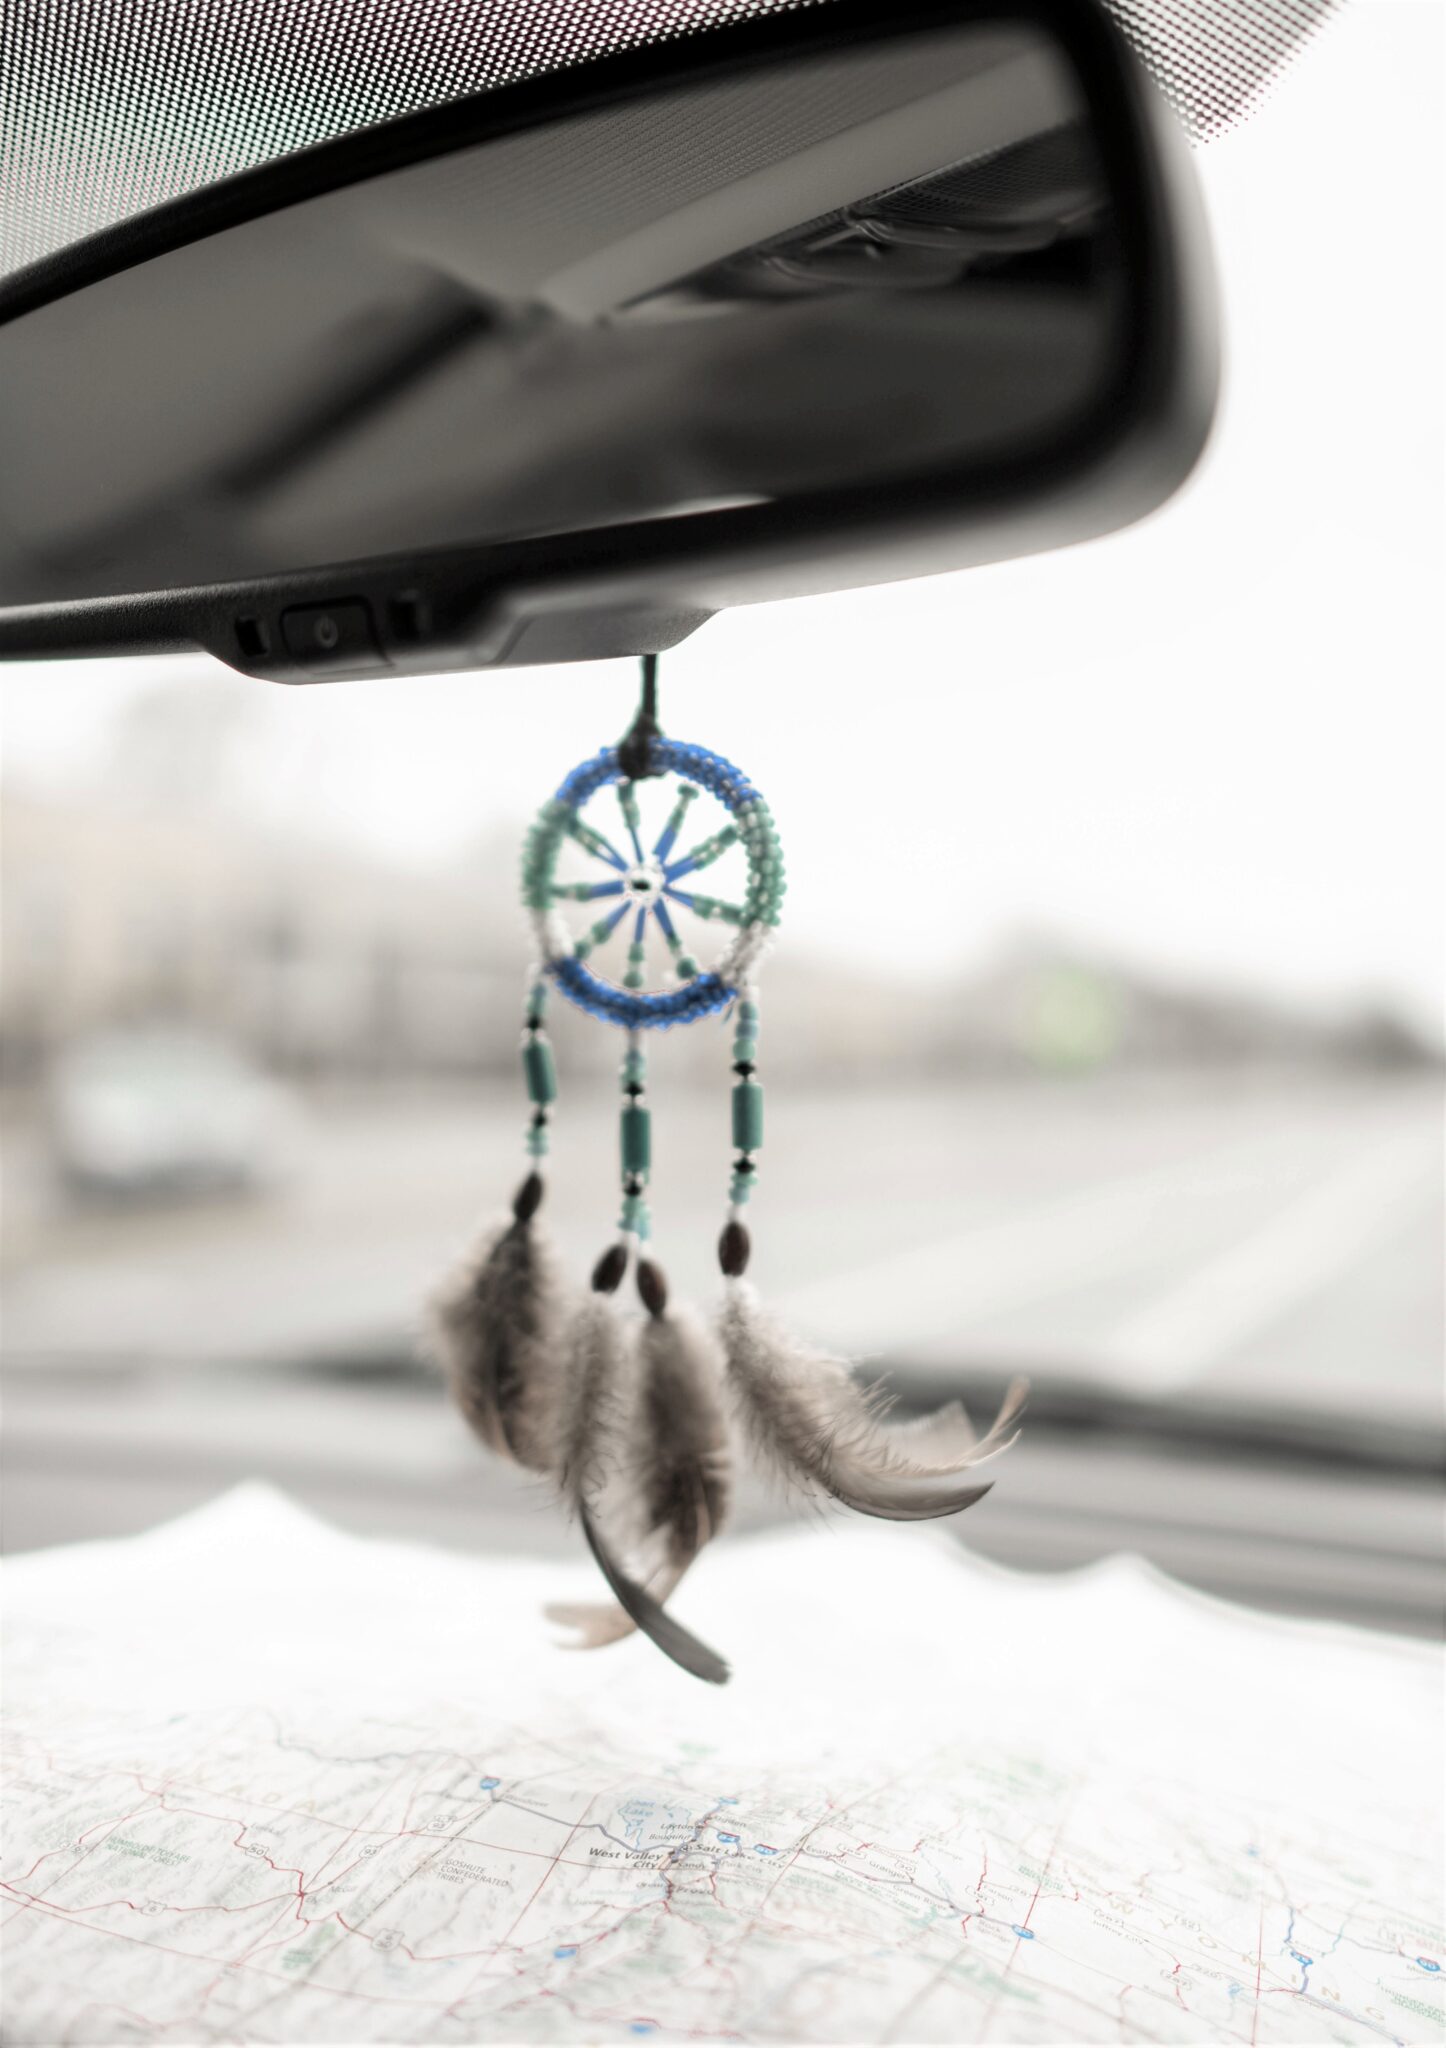 A dreamcatcher hangs on the rearview mirror and a map lies below, and ahead is the open road. This article covers what should your road trip route look like?